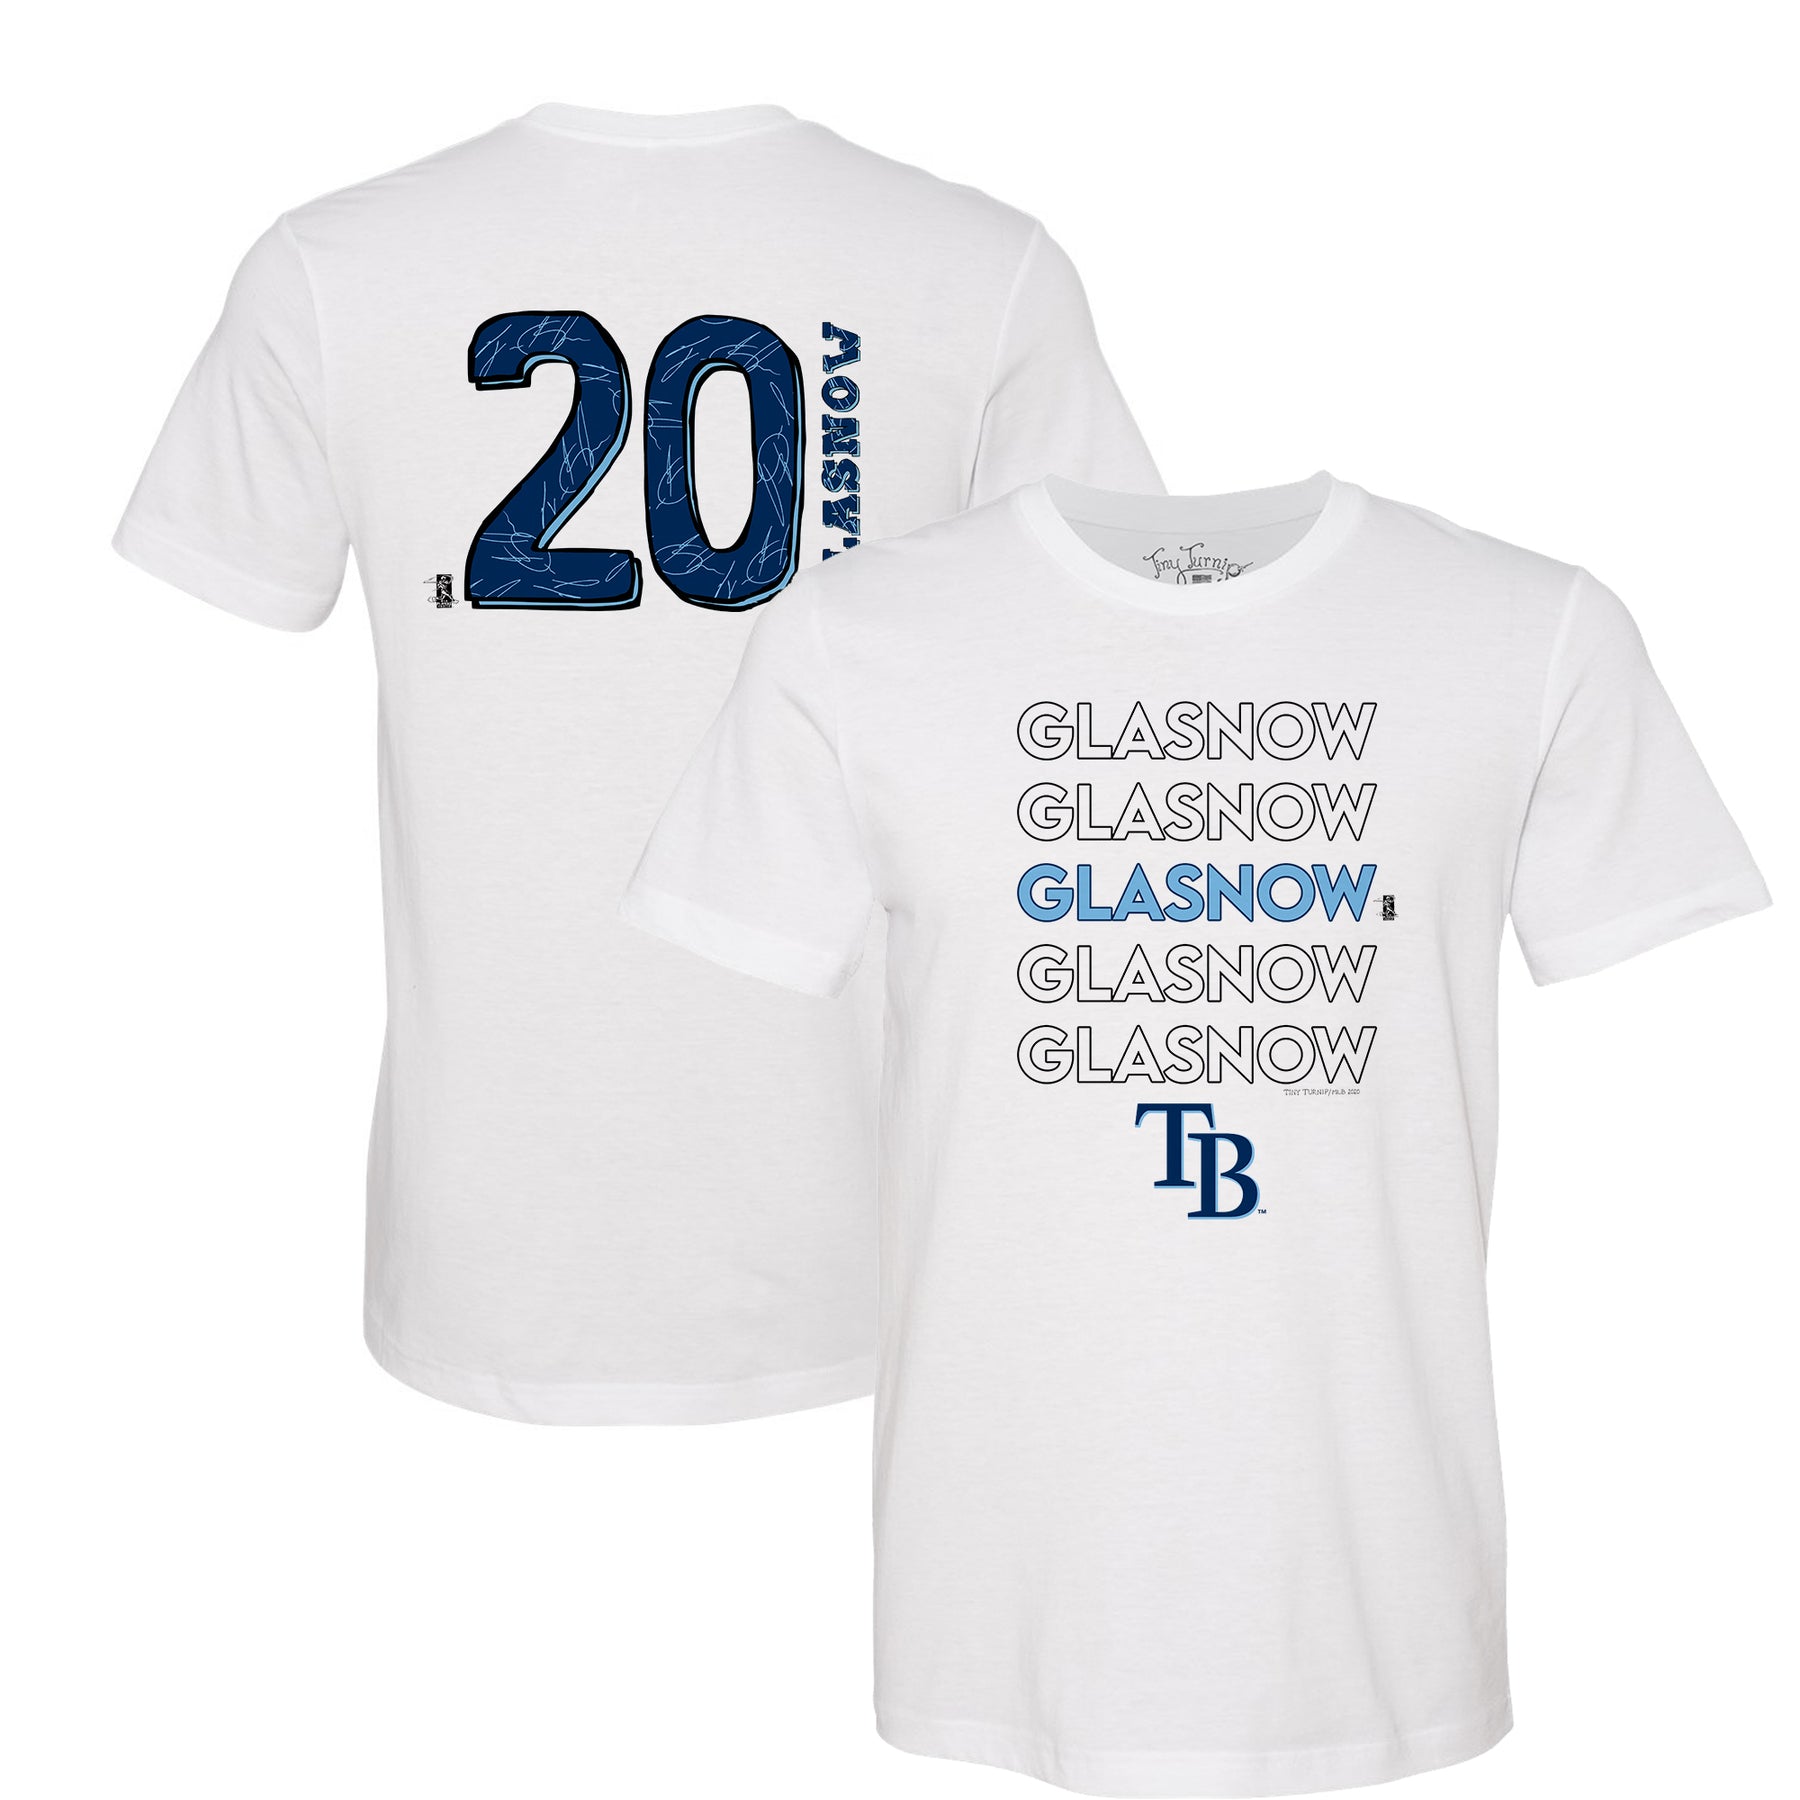 Tampa Bay Rays Tyler Glasnow Stacked Tee Shirt